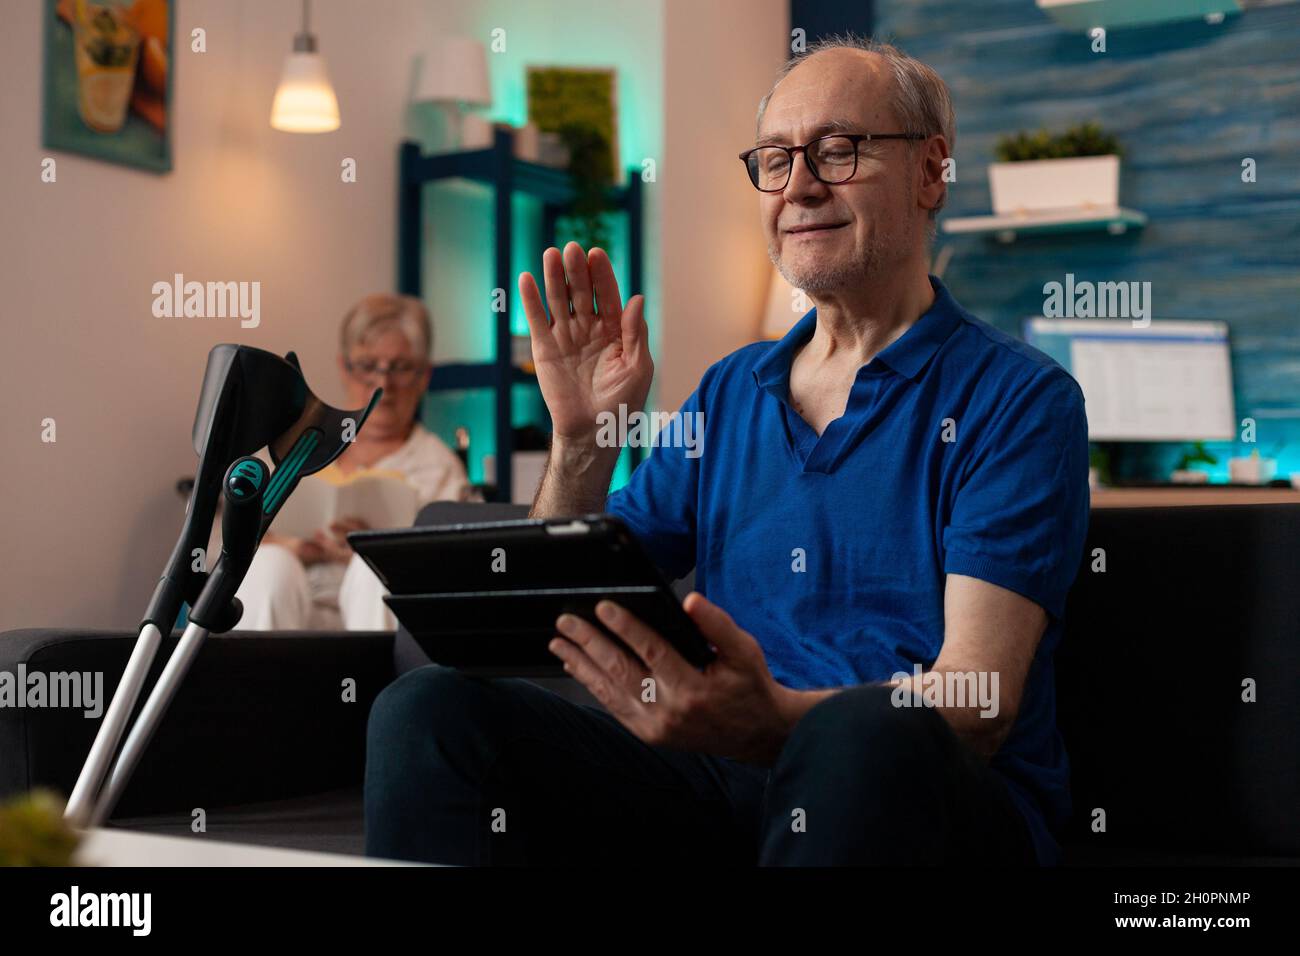 Elderly person waving at tablet with video call conference on sofa with crutches. Old man using online remote communication while senior woman sitting in wheelchair reading Stock Photo